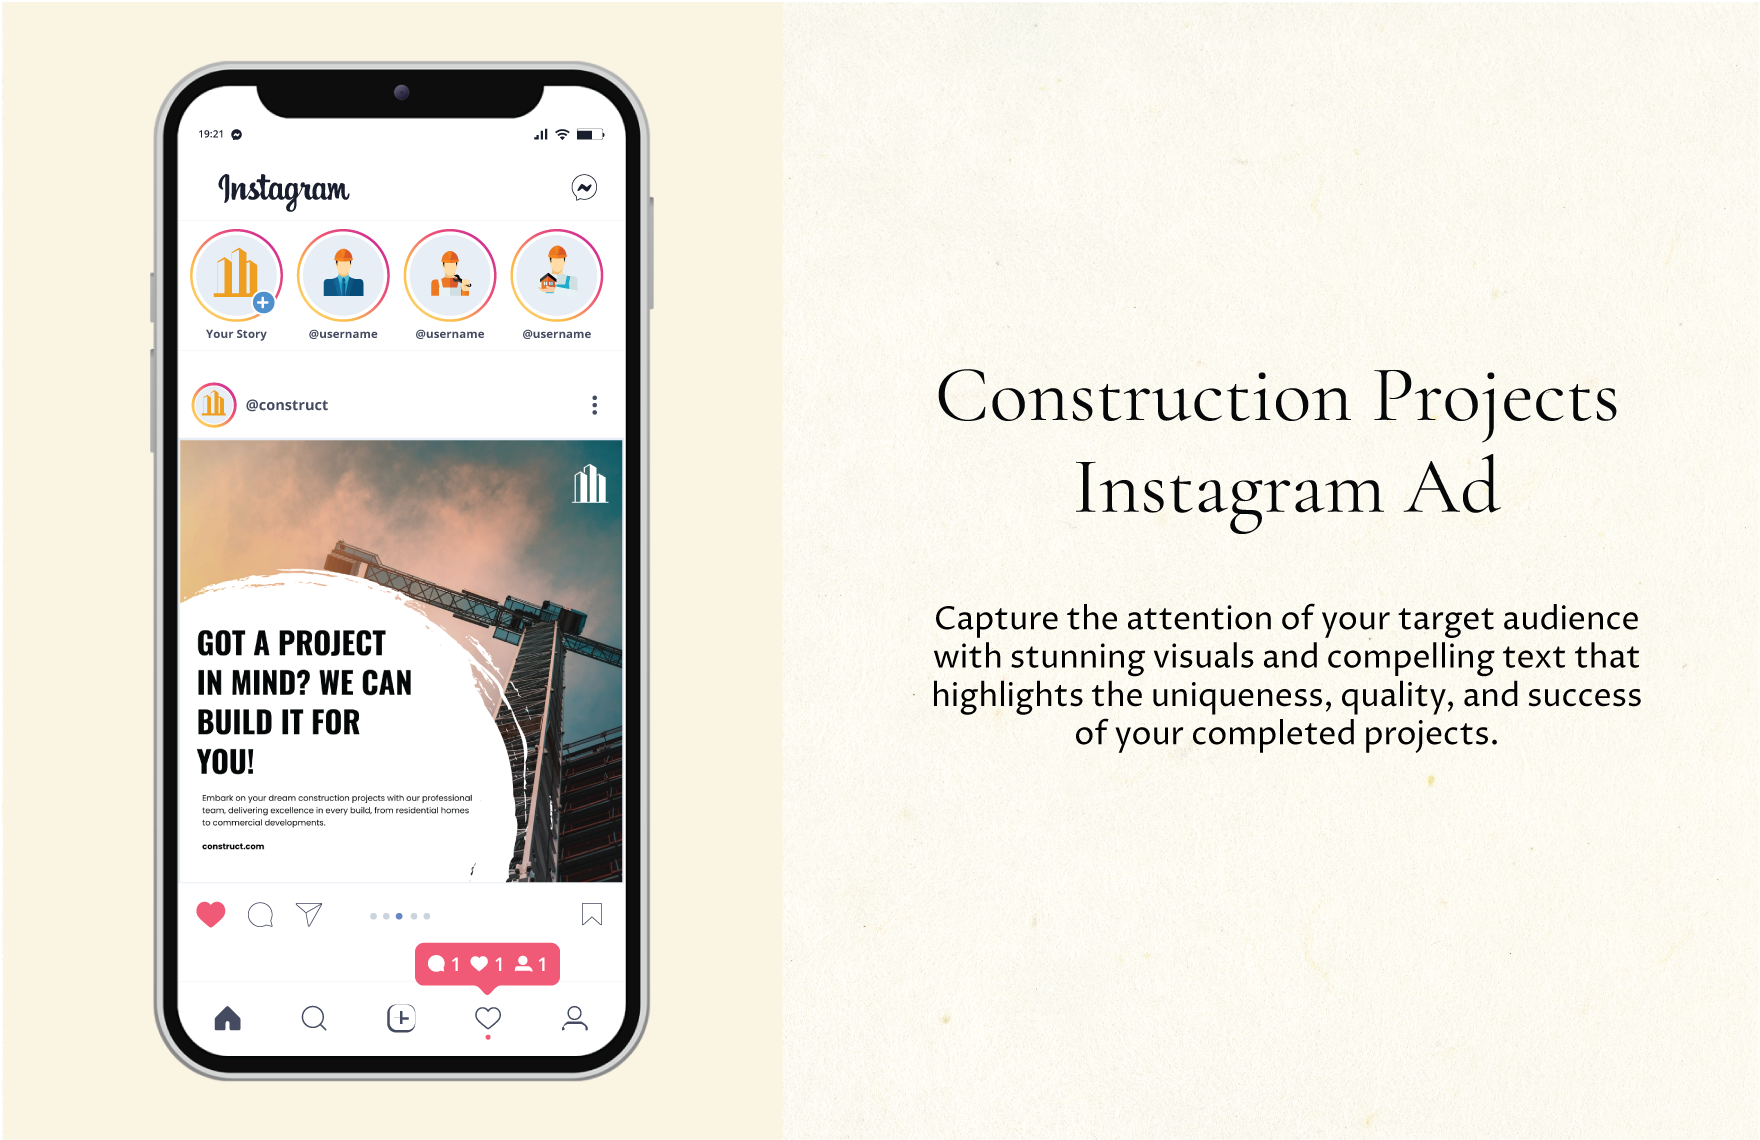 Construction Projects Instagram Ad